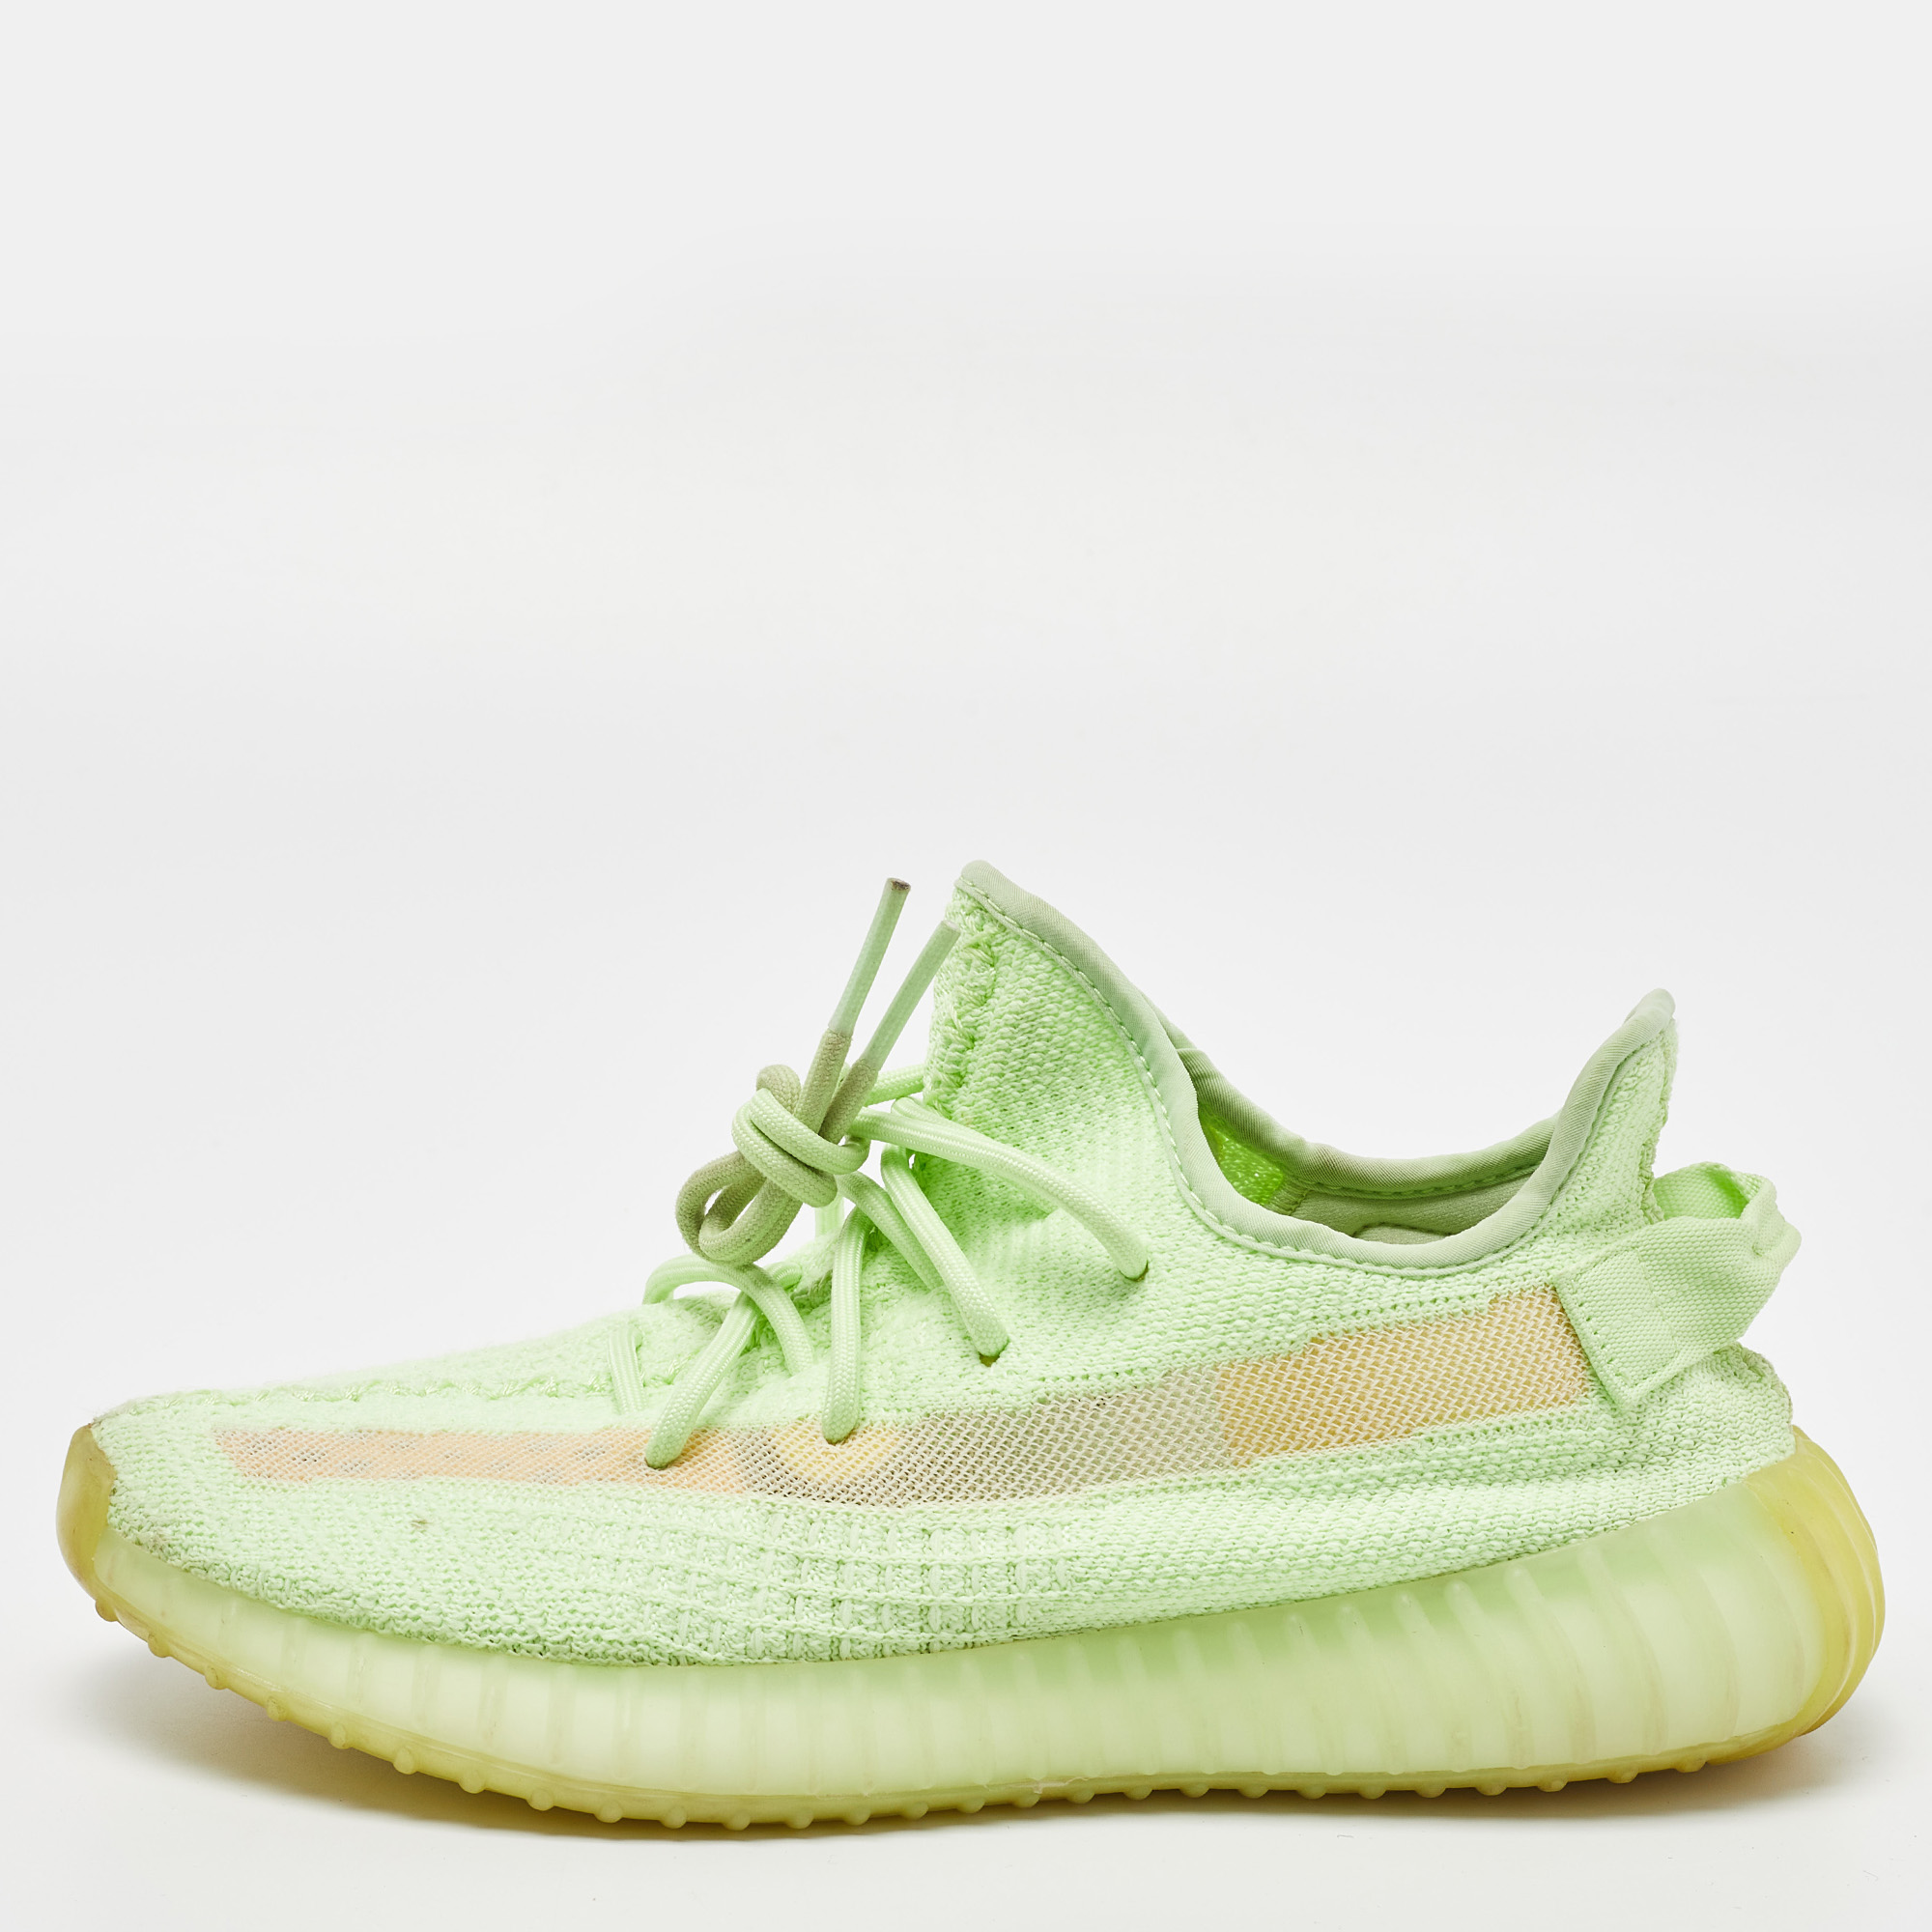 Yeezy X Adidas Green Knit Fabric Boost 350 V2 GID' Glow Sneakers Size 40 2/3